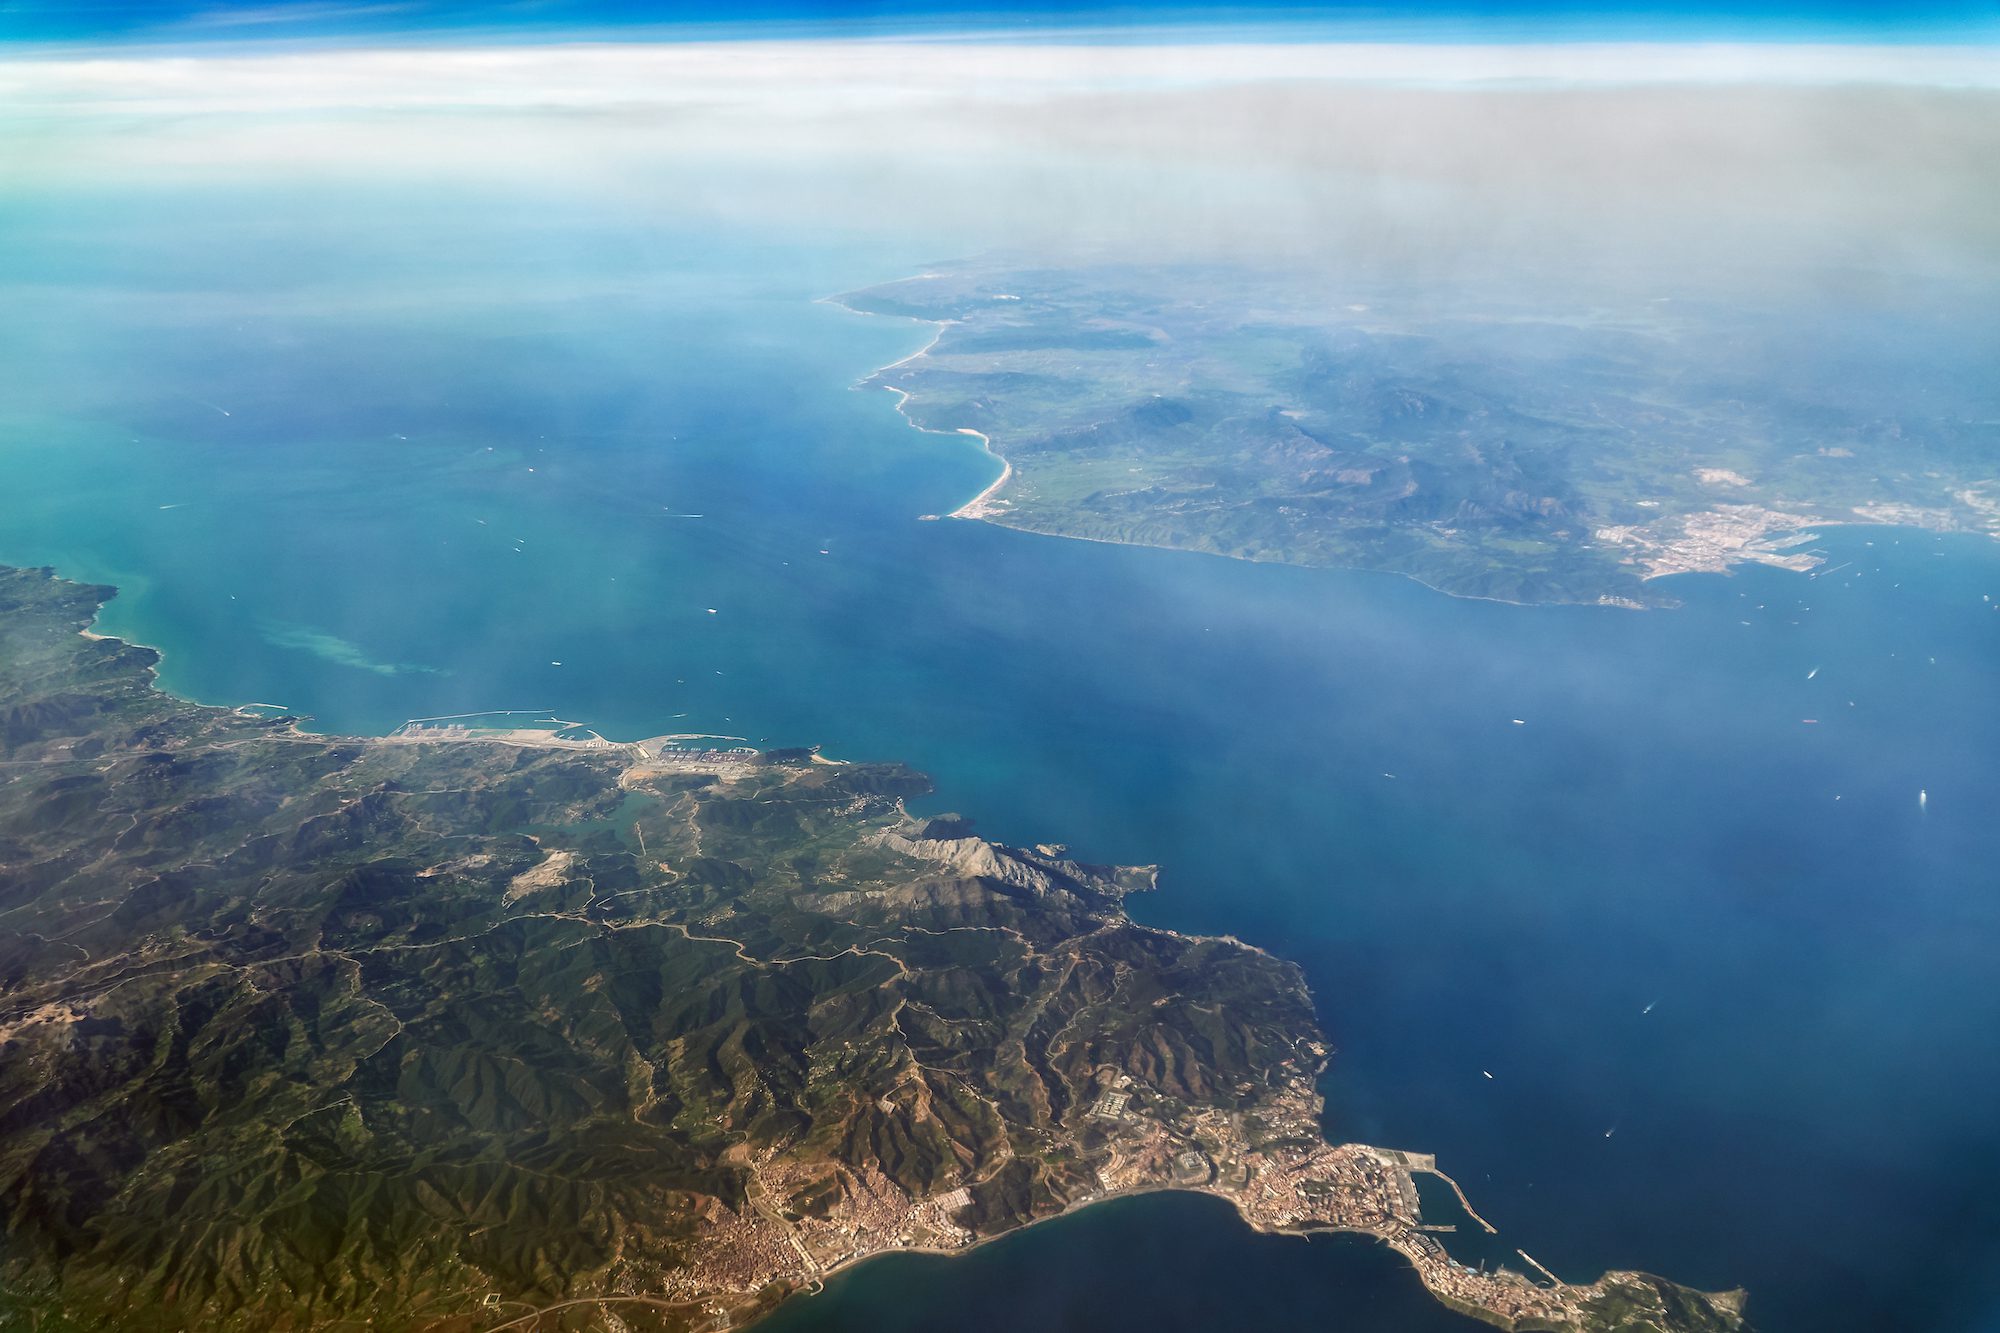 Aerial view of the Strait of Gibraltar connecting Africa and Europe